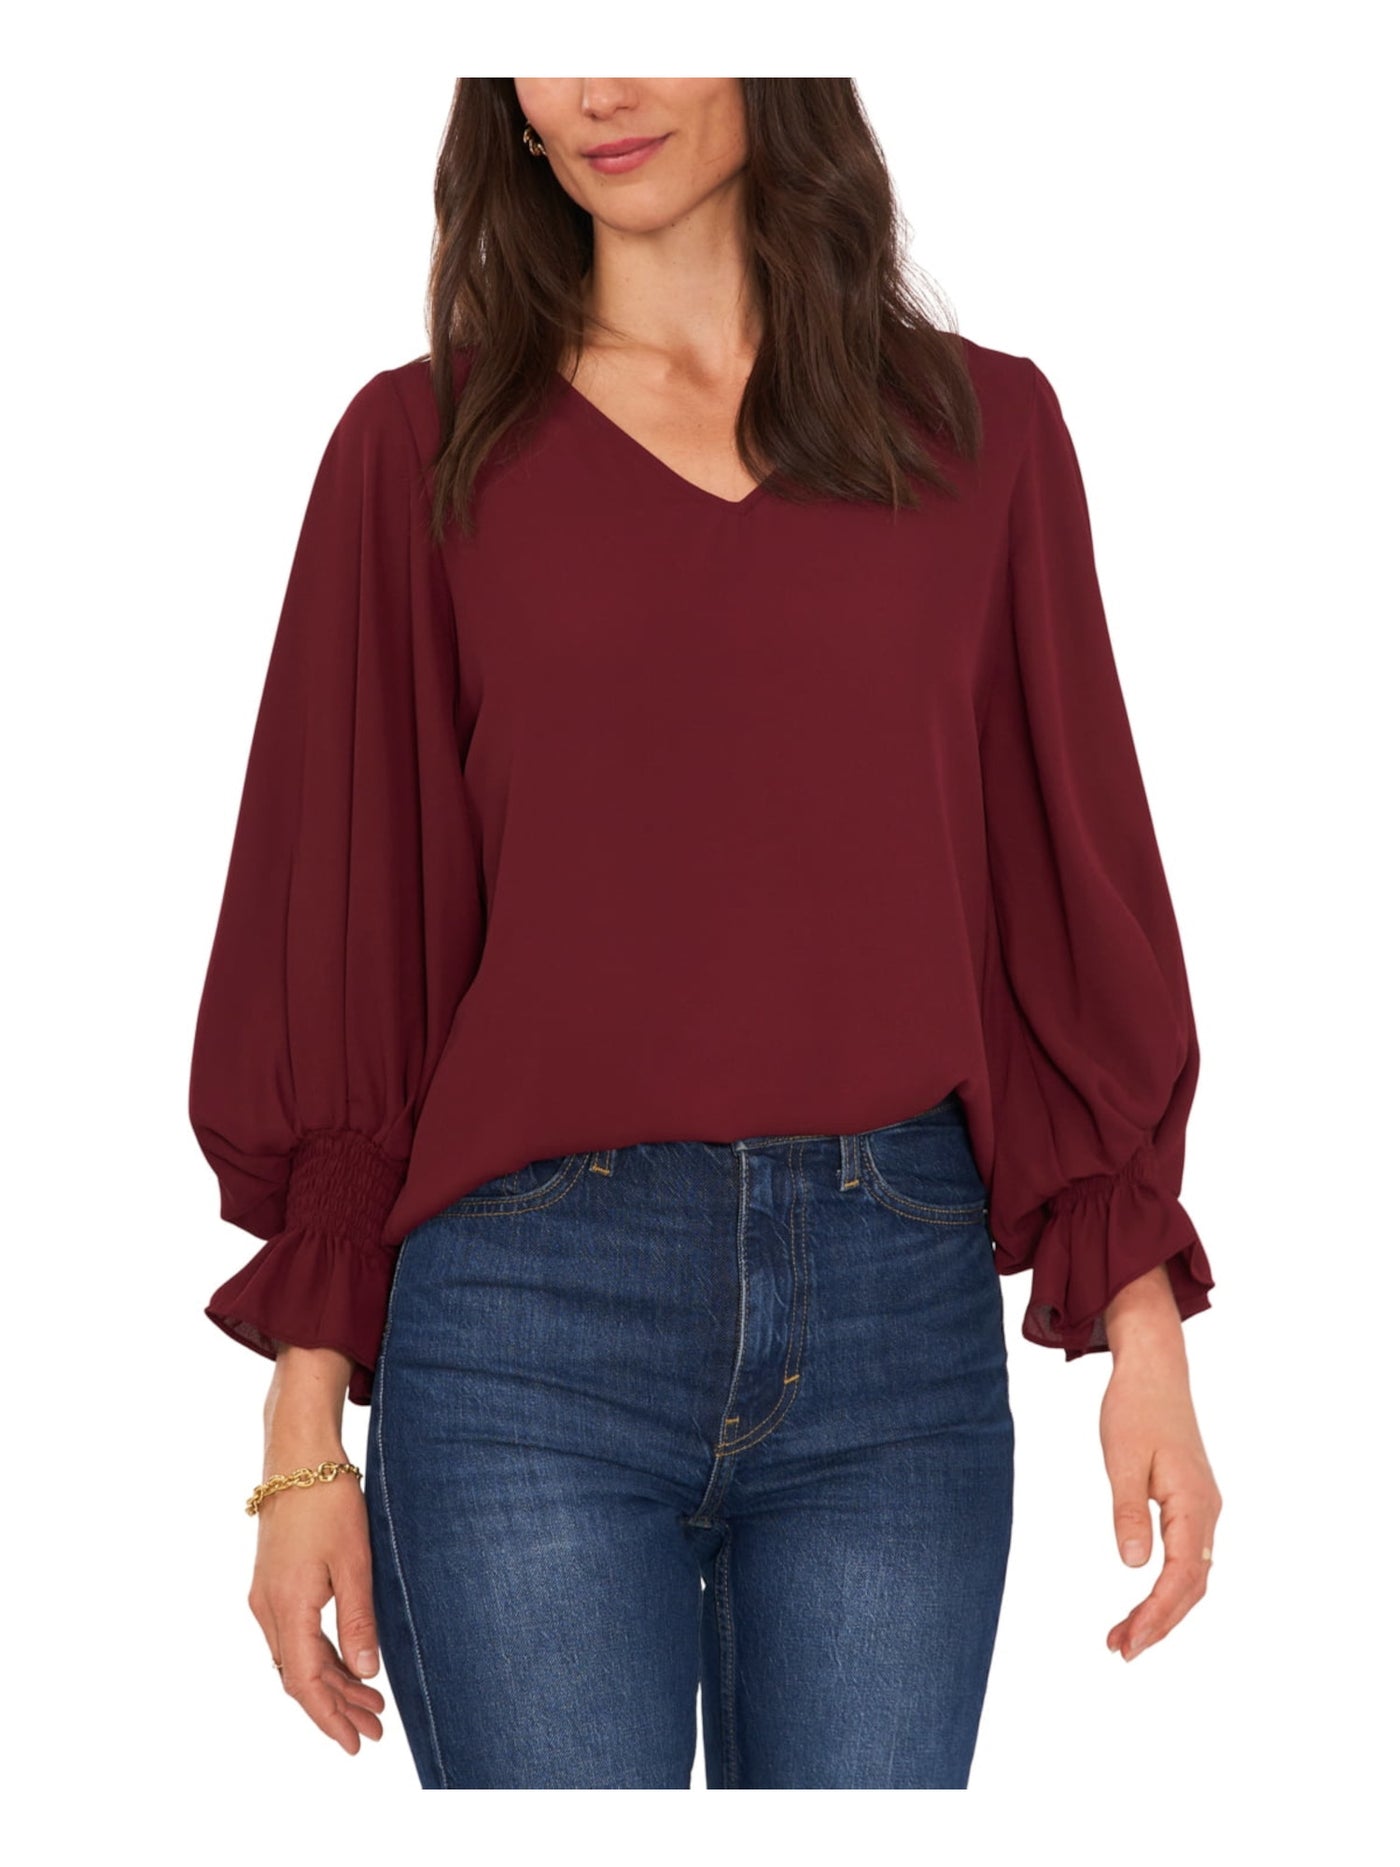 VINCE CAMUTO Womens Maroon Smocked Ruffled Loose Fit Unlined Sheer Long Sleeve V Neck Blouse L